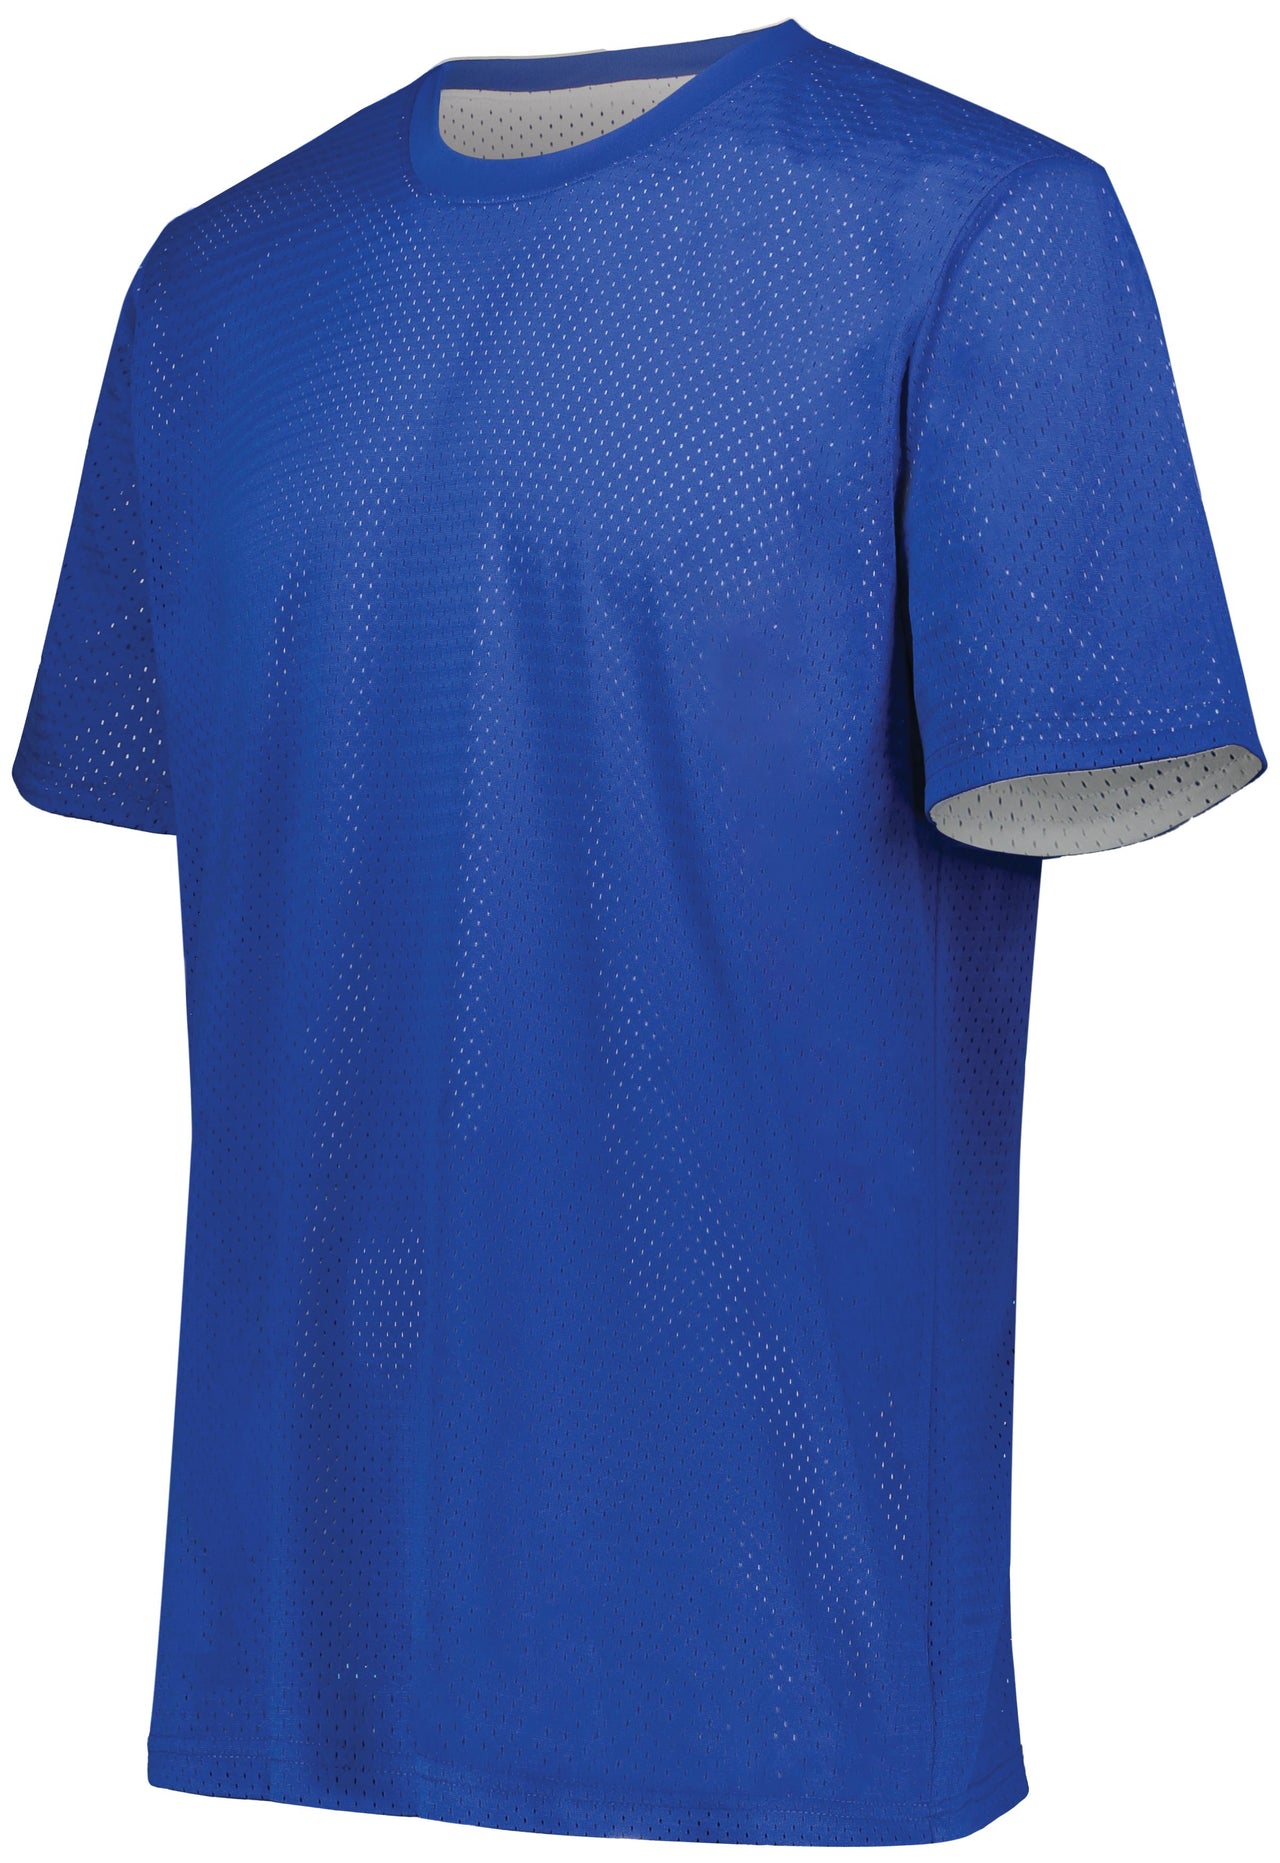 Youth Short Sleeve Mesh Reversible Jersey - 1603